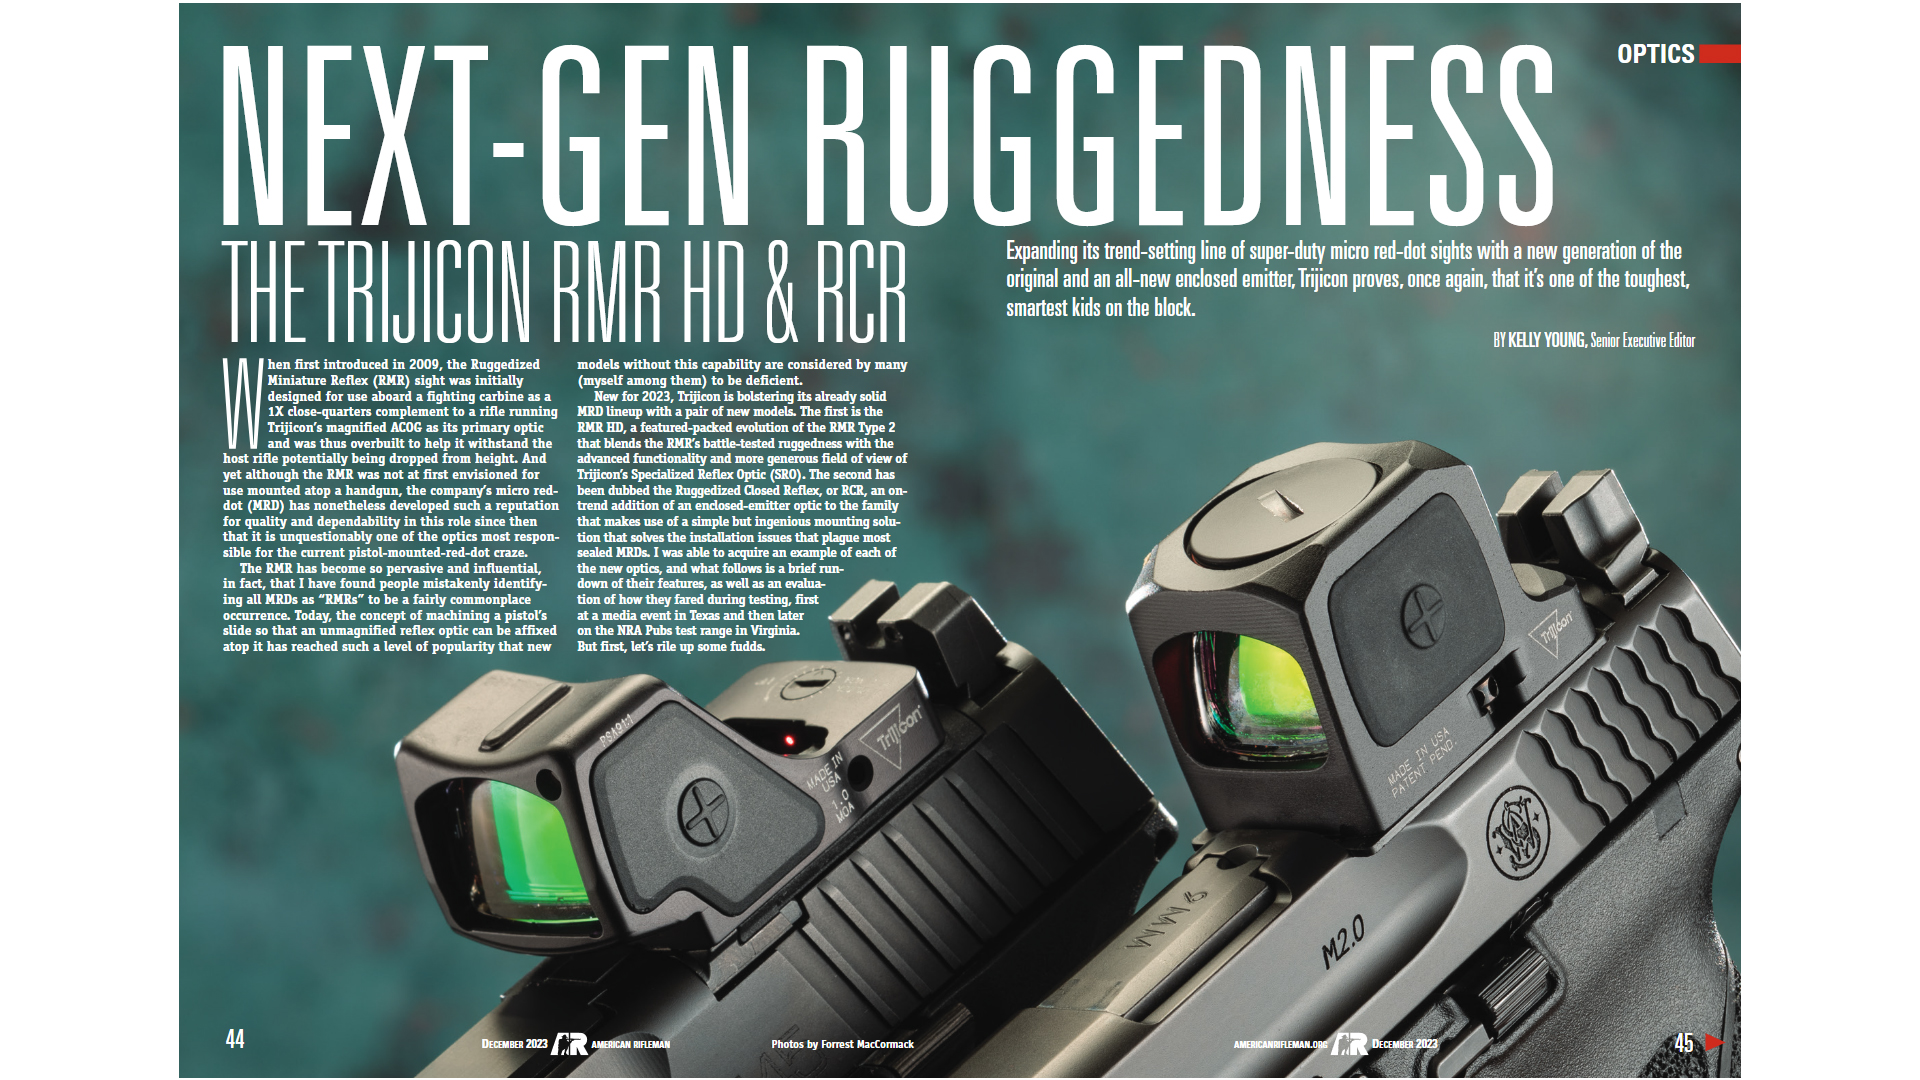 American Rifleman magazine spread Trijicon NEXT-GEN RUGGEDNESS The TRIJICON RMR HD & RCR by Kelly Young text on image with handguns optics